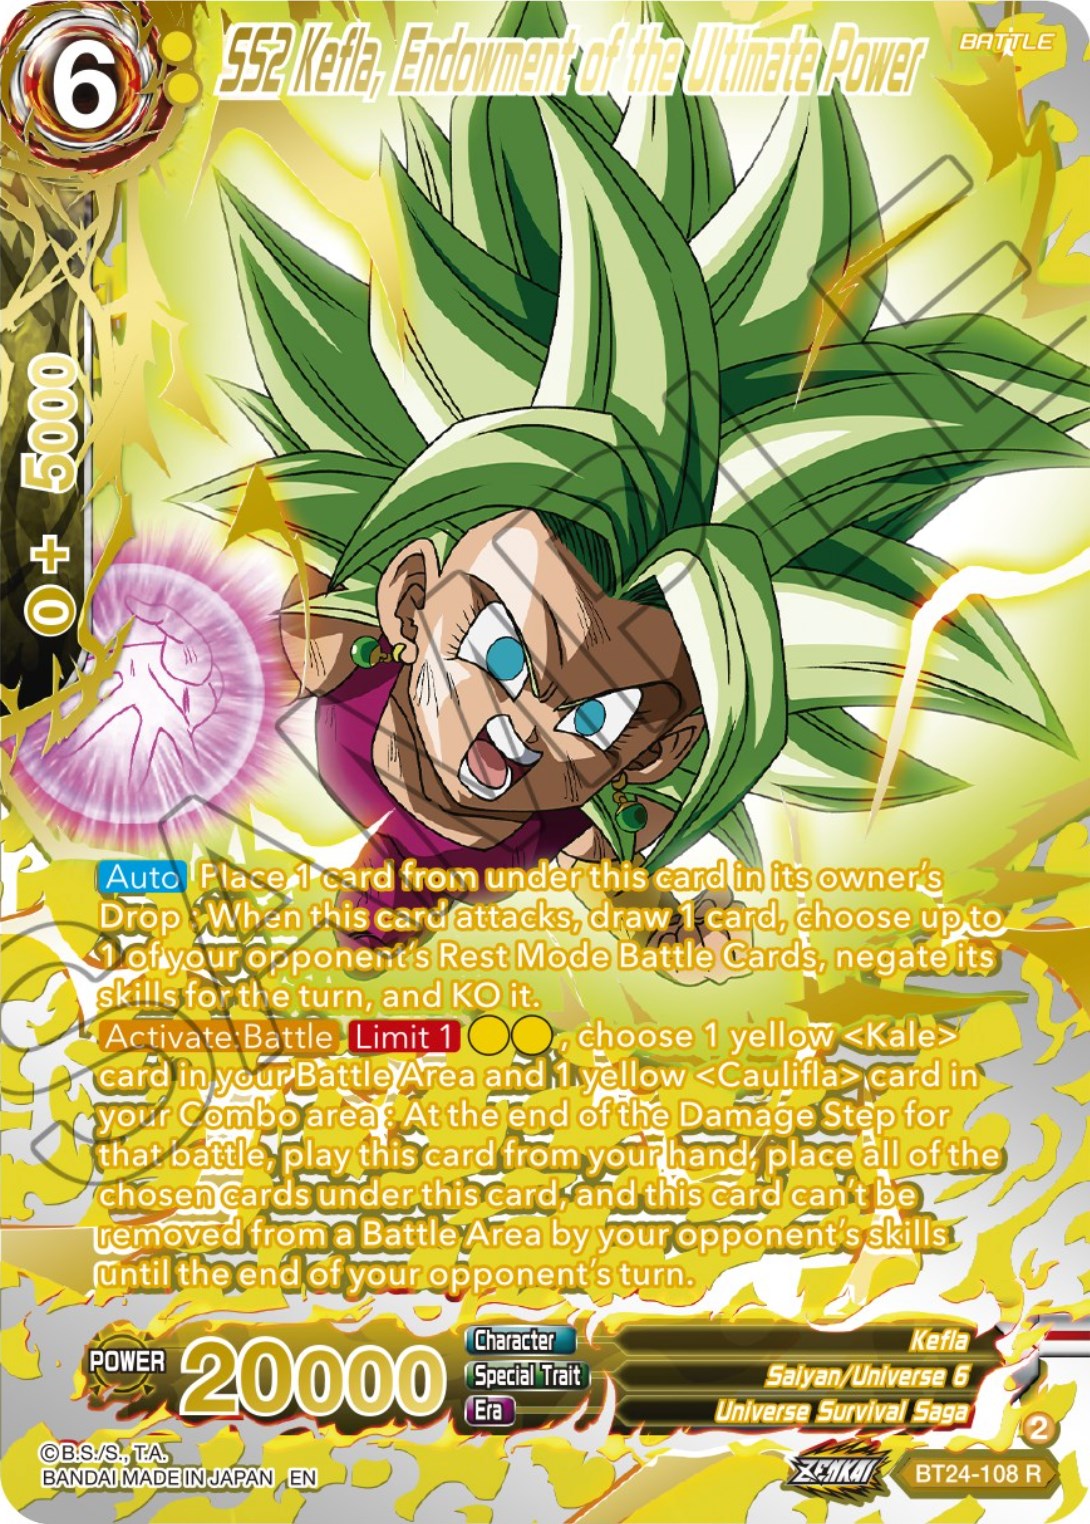 SS2 Kefla, Endowment of the Ultimate Power (Collector Booster) (BT24-108) [Beyond Generations] | Devastation Store